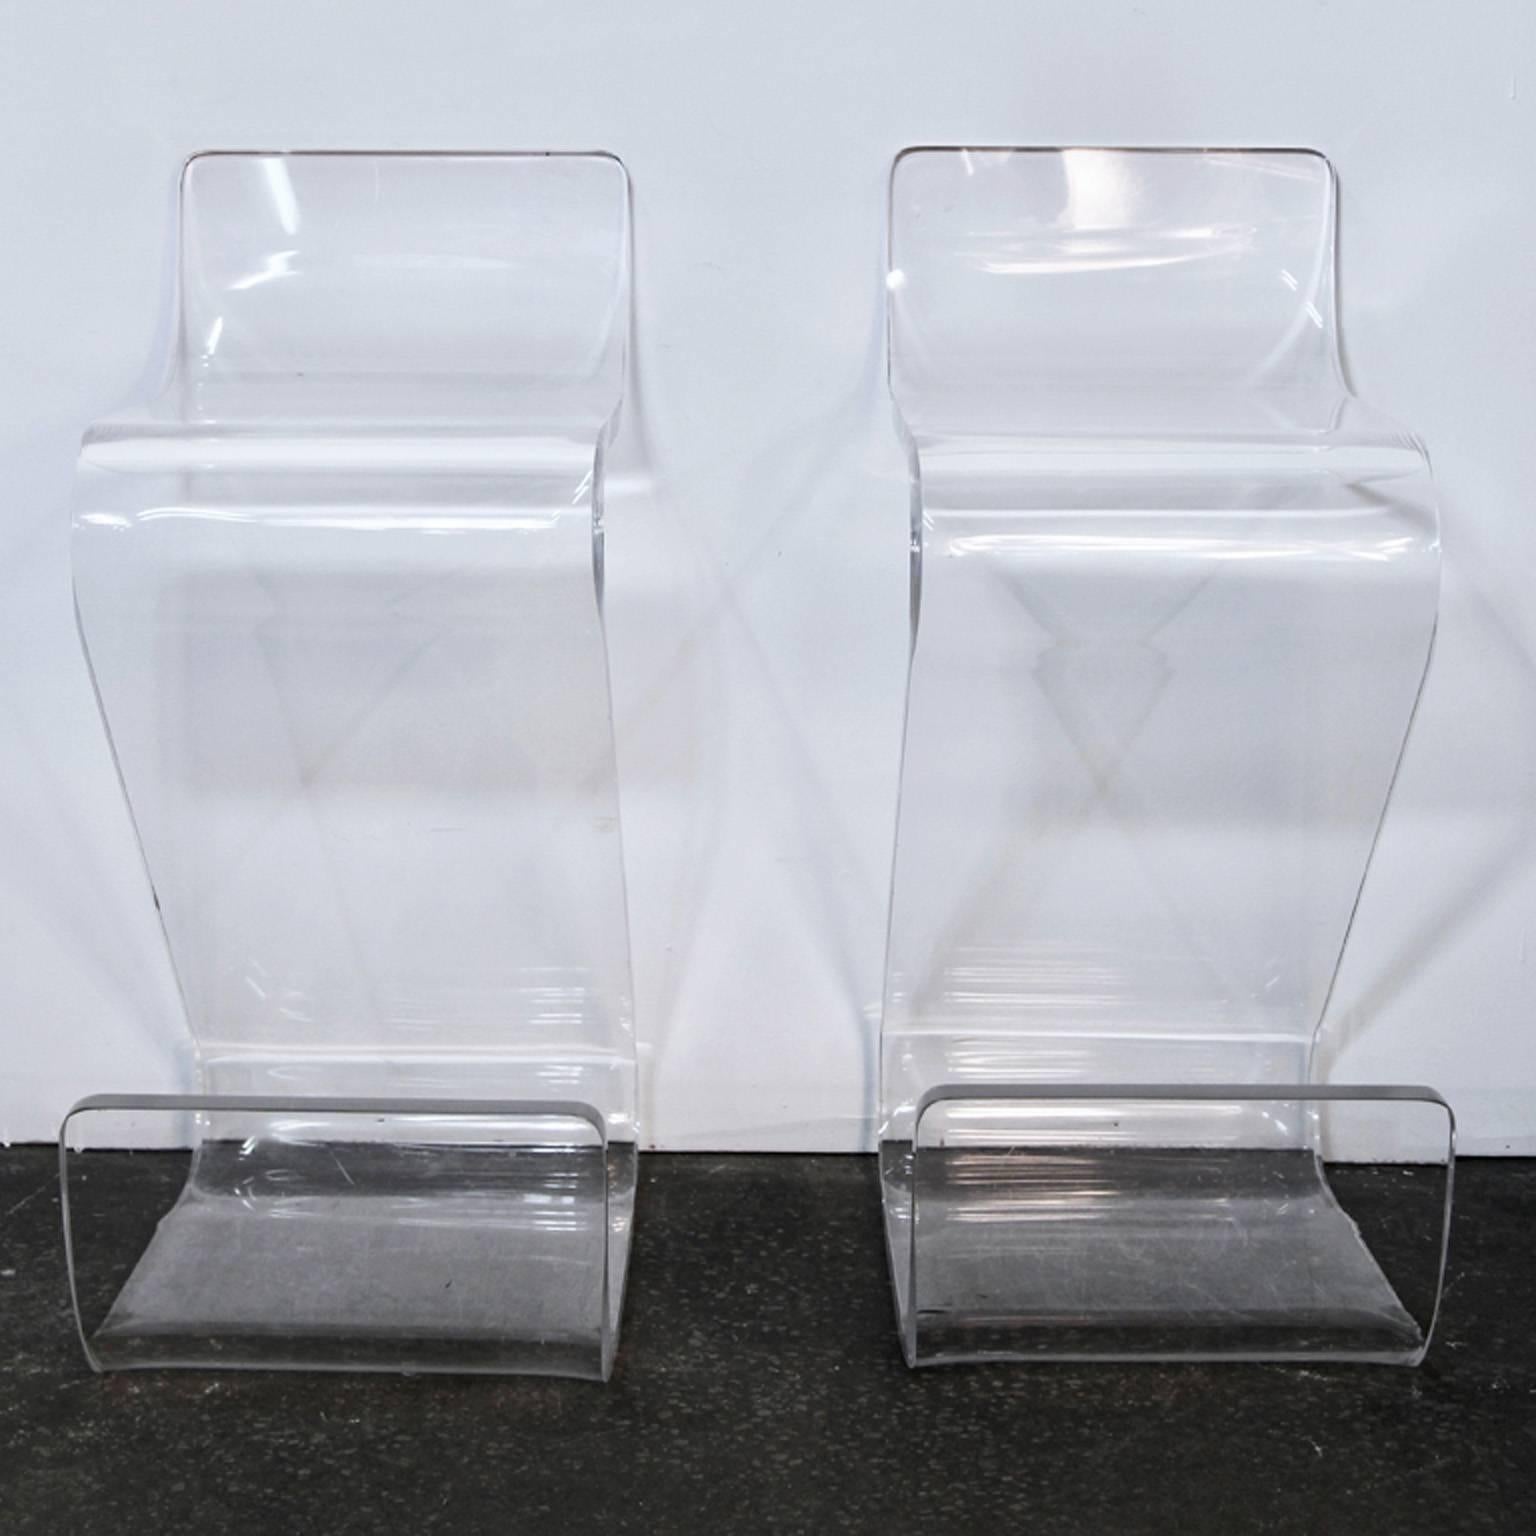 Incredible pair of Mid-Century Lucite Z-shaped stools. 1 inch thick Lucite. Very heavy. Rare set of stools that will make an amazing impression for any counter or bar area.